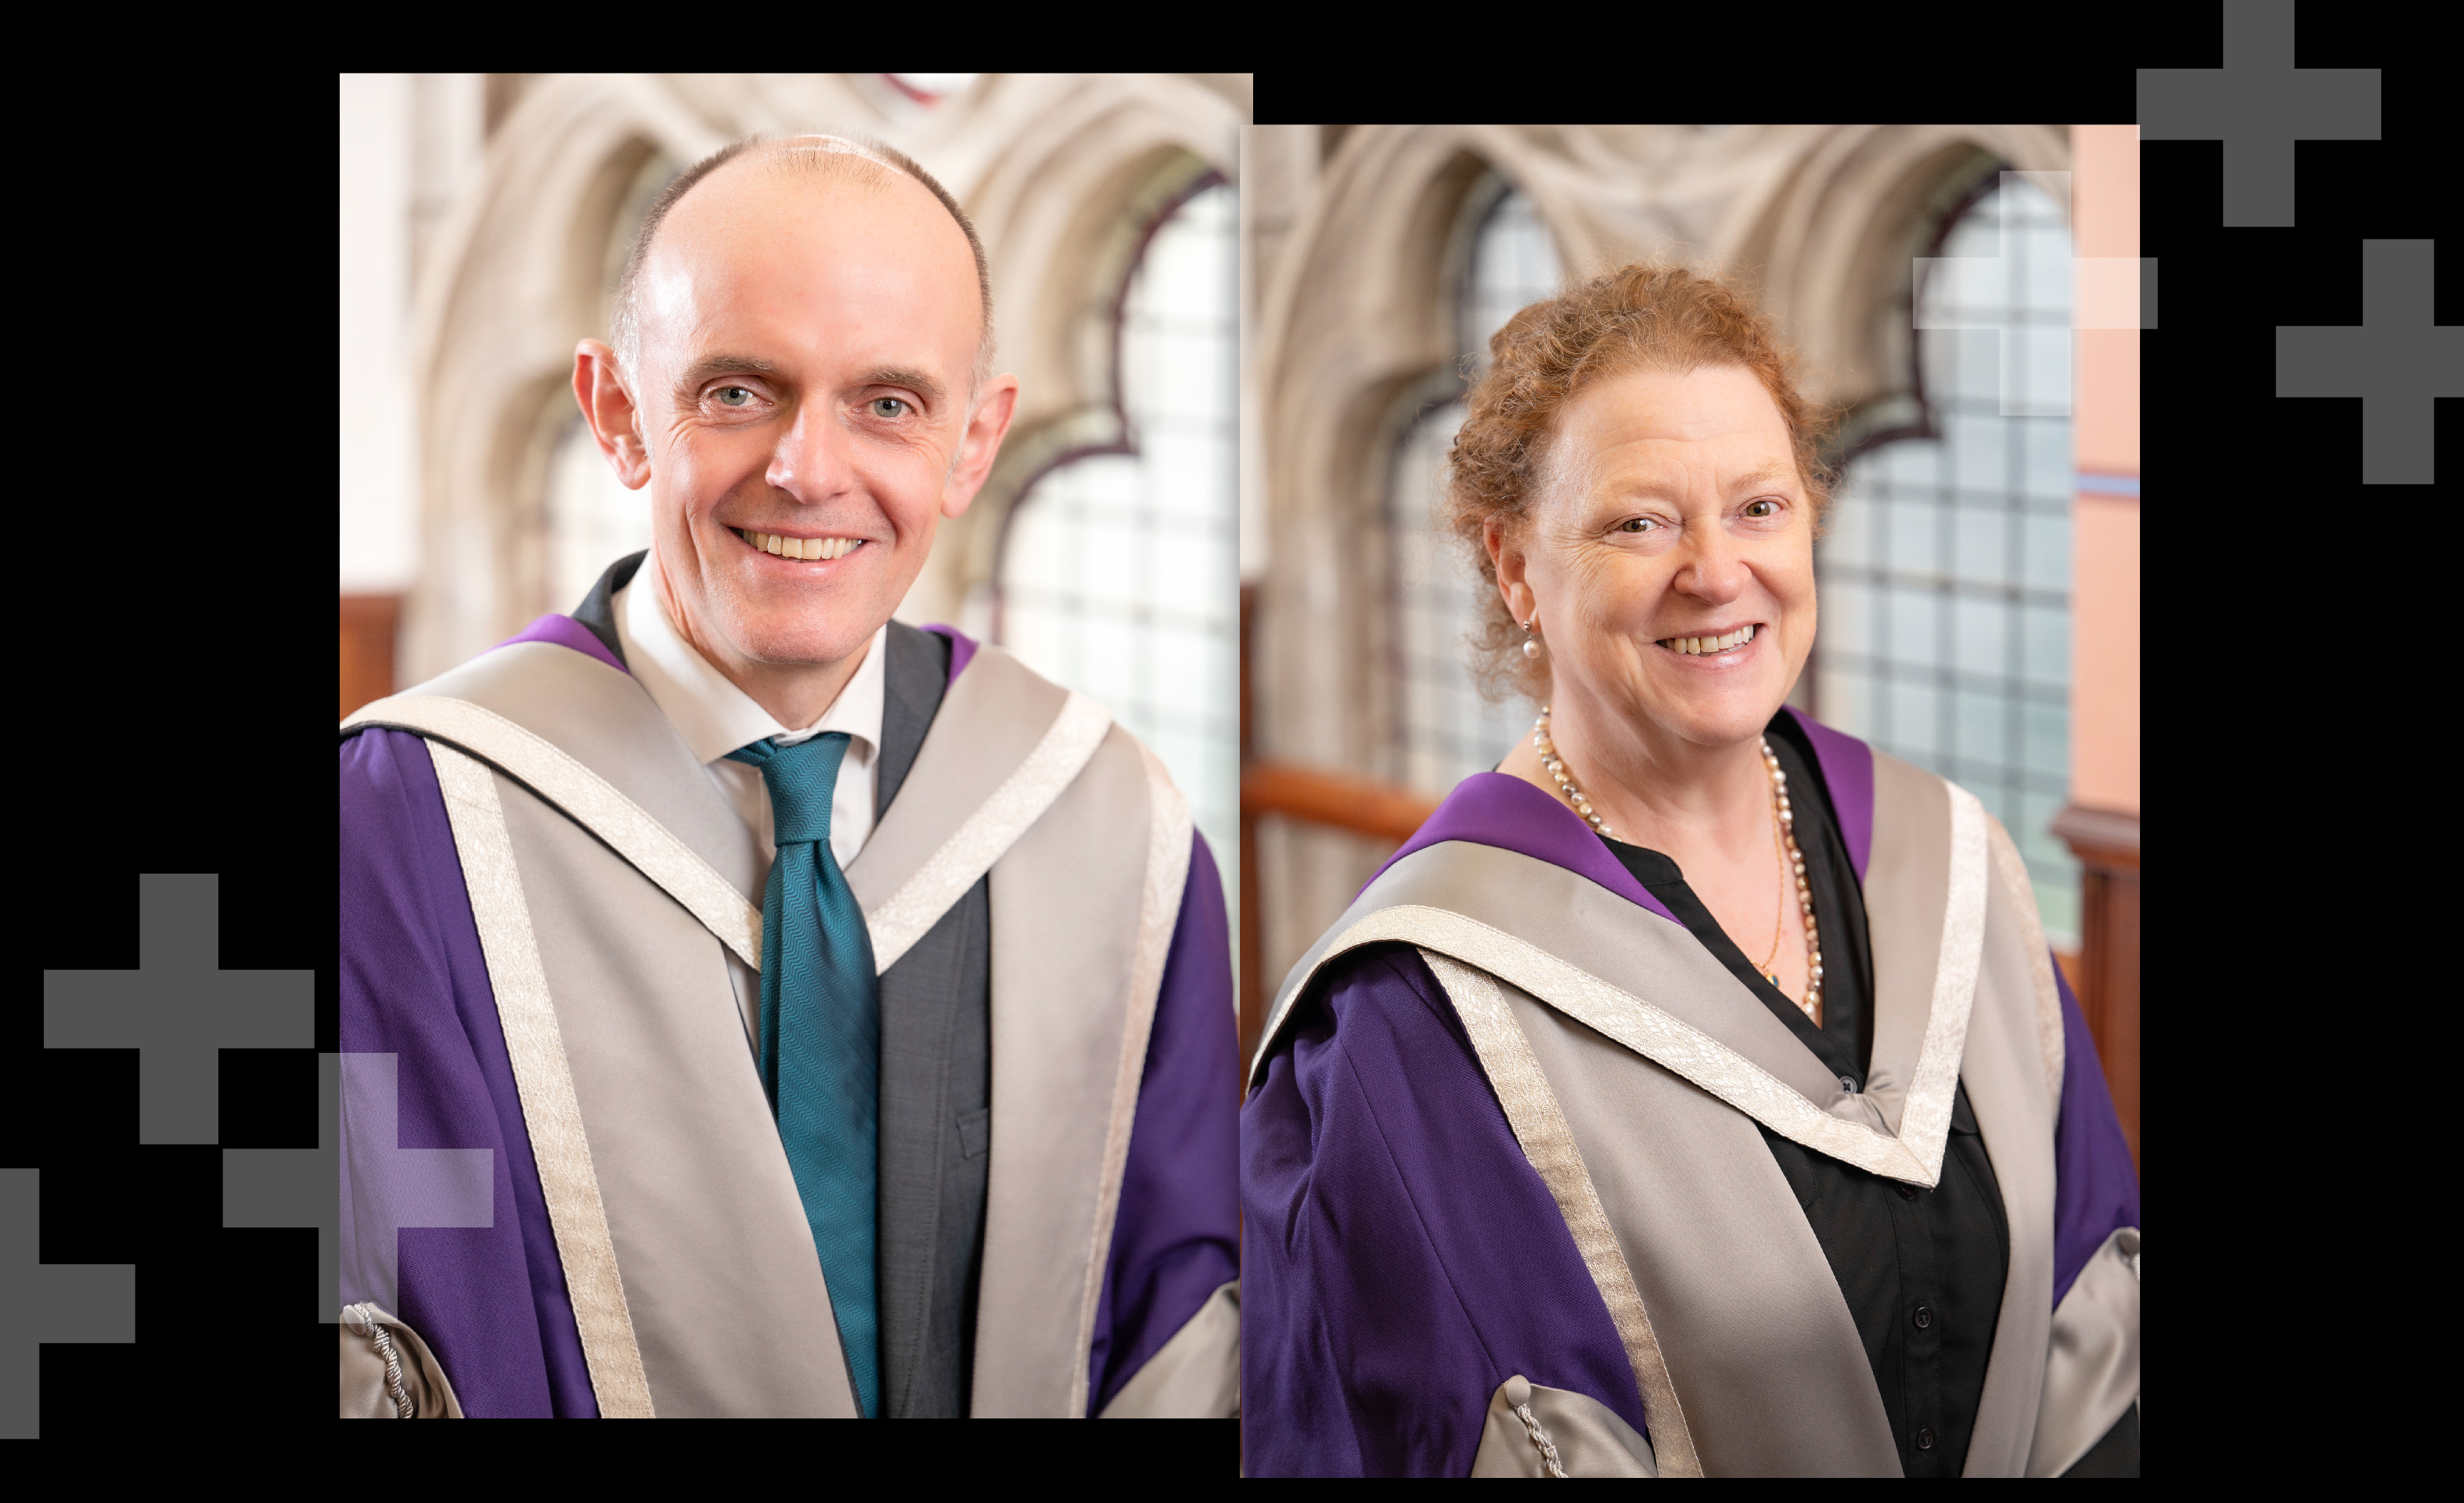 Leading forensic anthropologist and renowned musician honoured at UHI ceremony